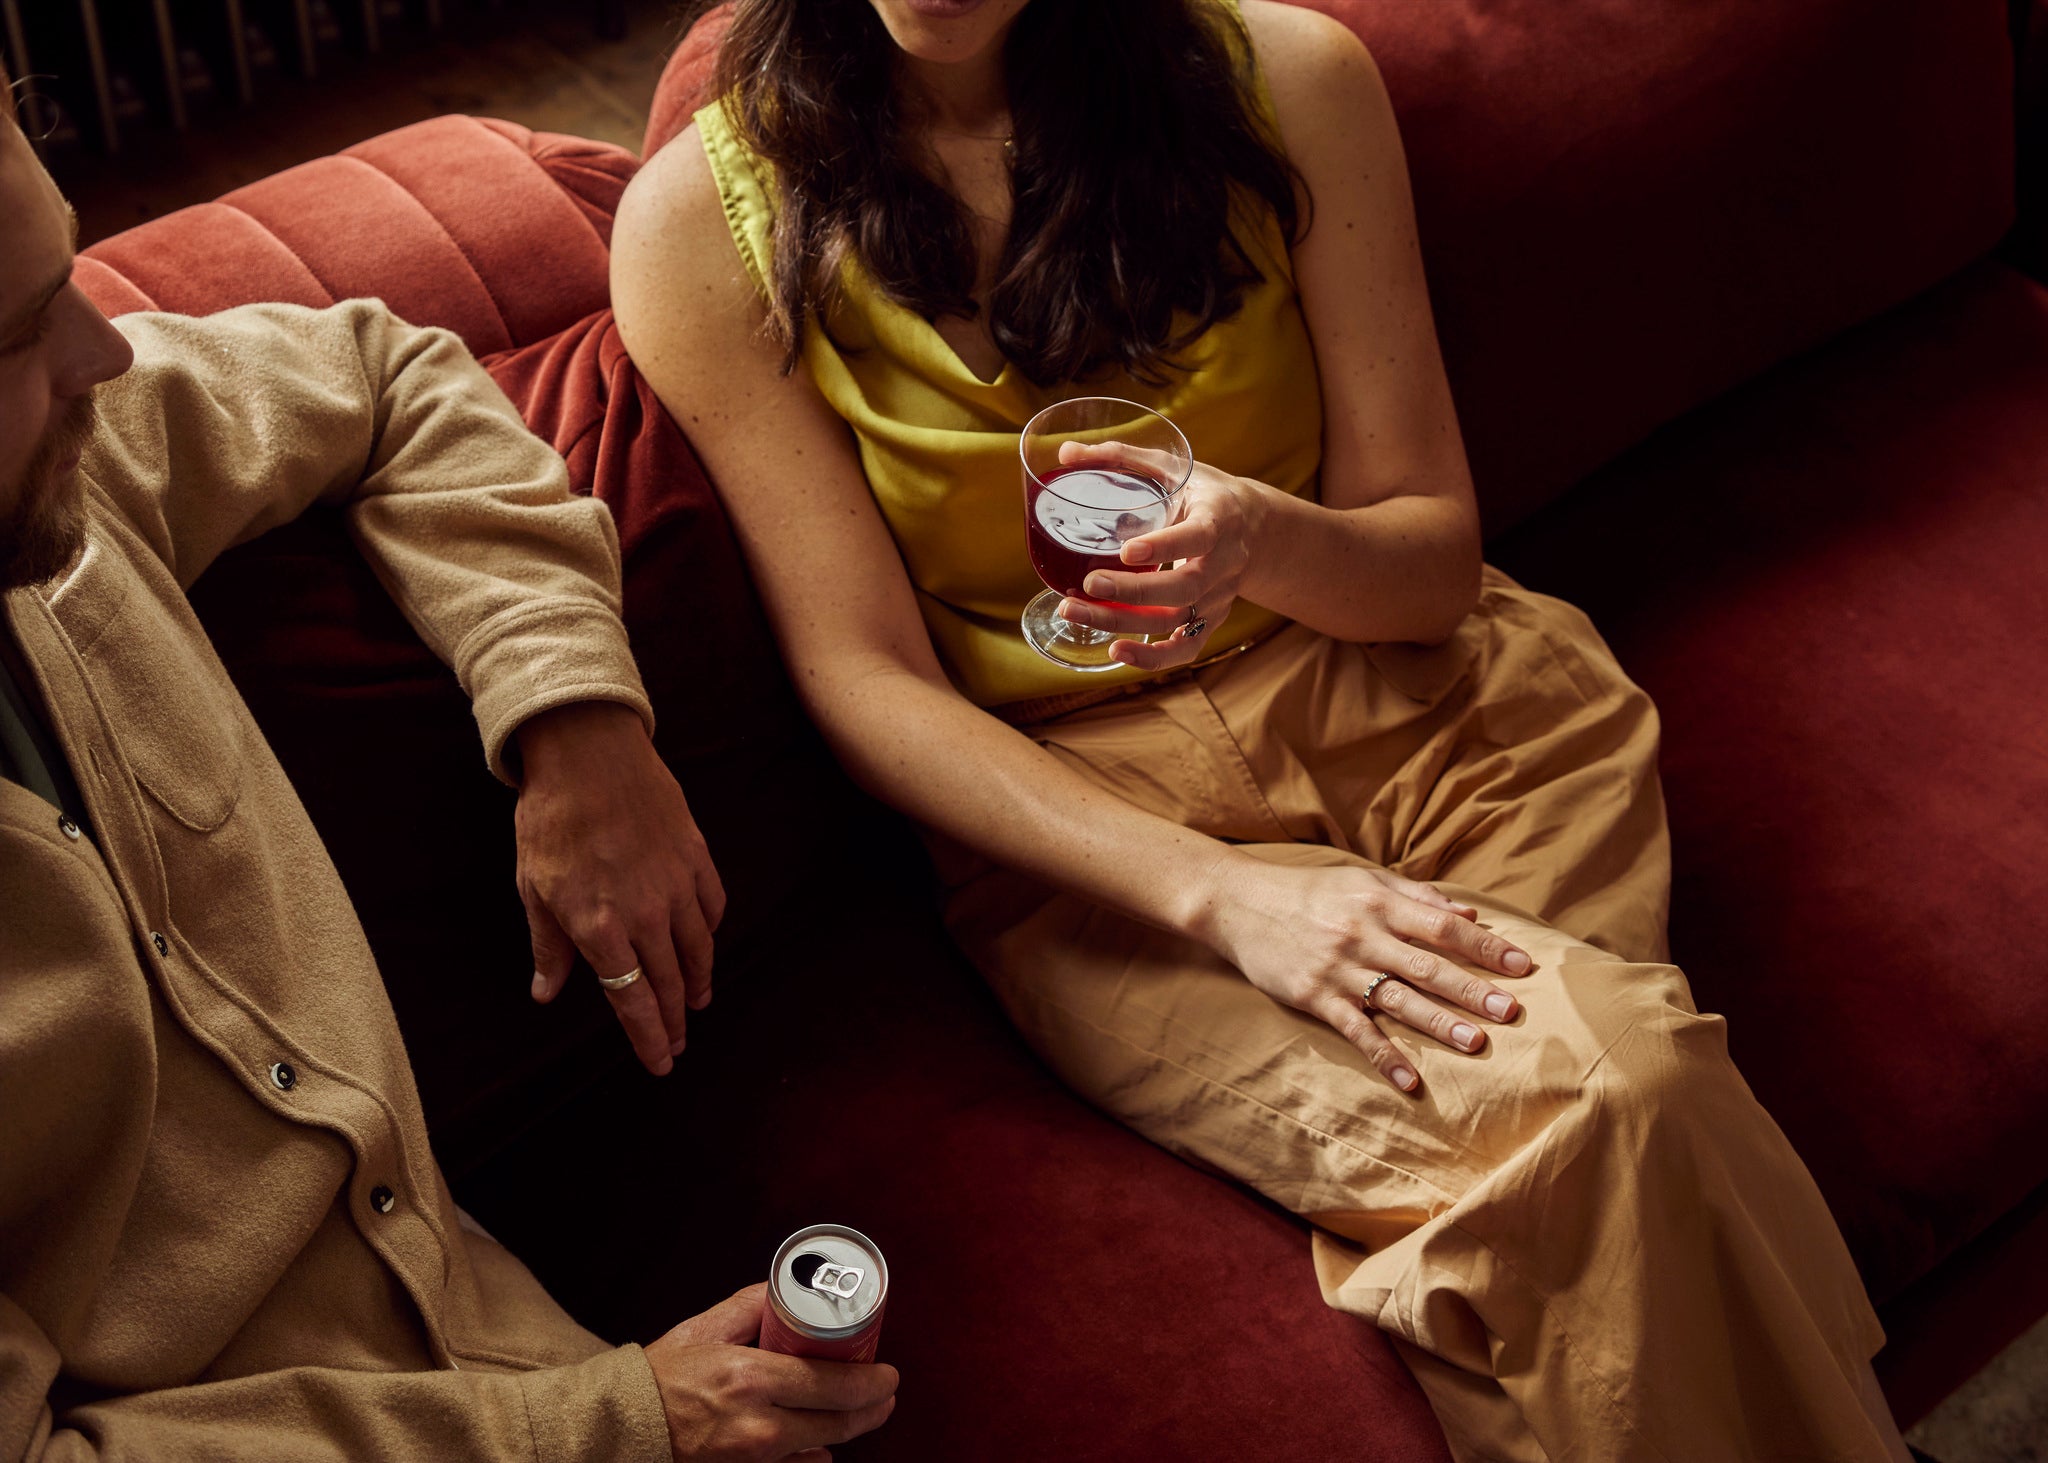 A woman and a man seating on a red velvet sofa. He has his elbow on the back of the sofa and is holding a can of Candour red wine. She has her hand over her crossed legs and is drinking a glass of red wine.